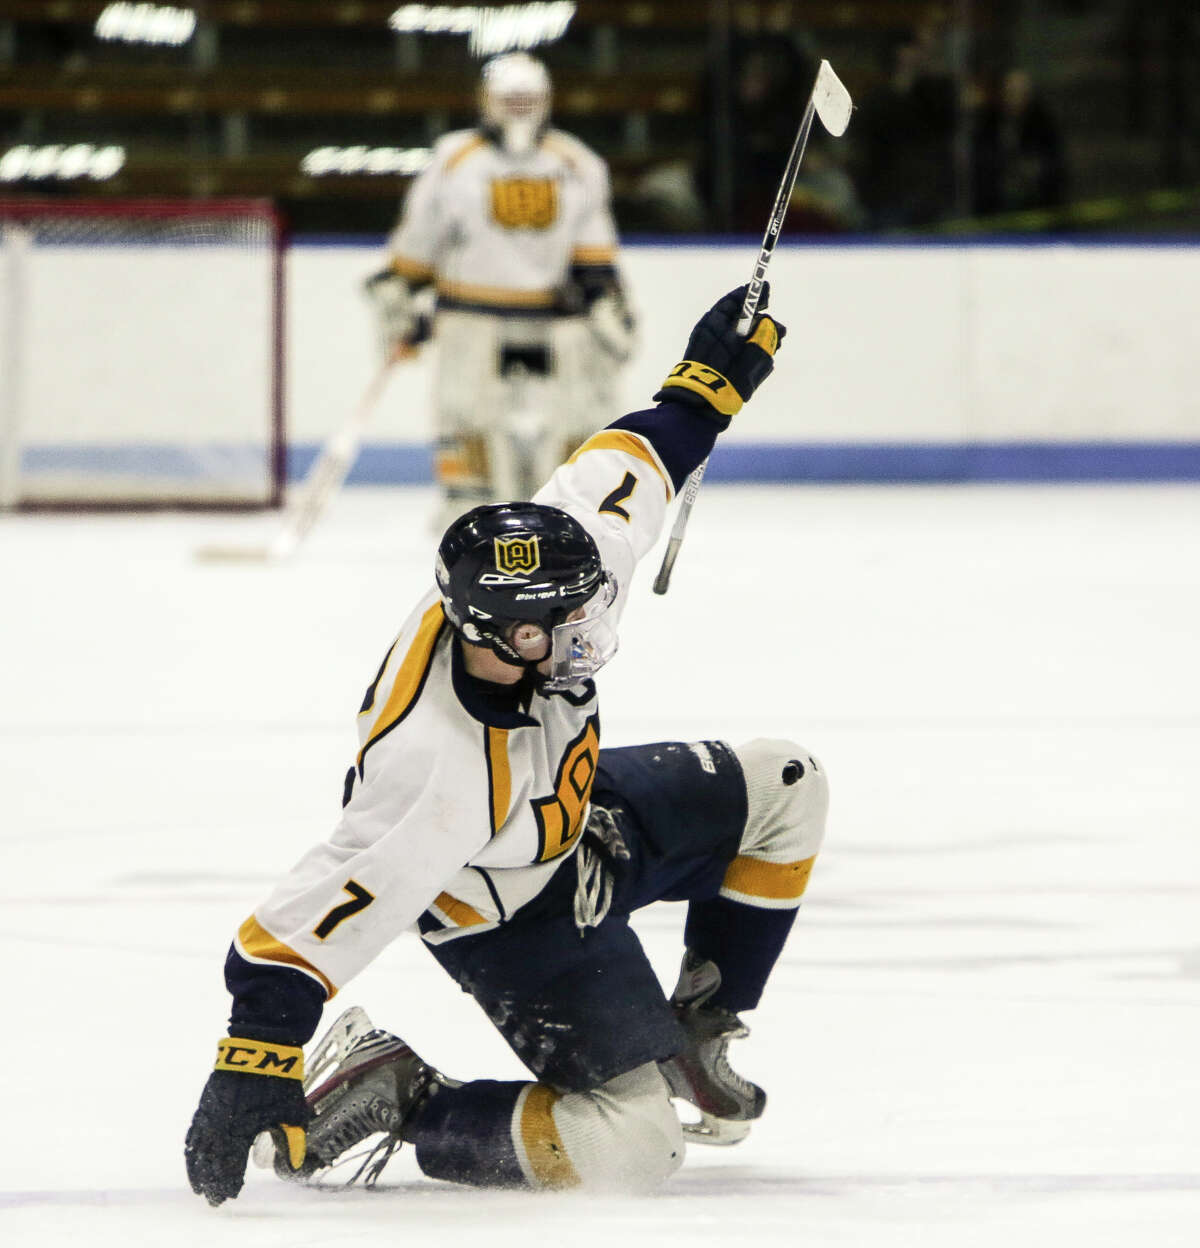 (John Vanacore/New Haven Register) Action from the CIAC Division 3 Boys Hockey Championship pitting Woodstock Academy again Hall/Southington Saturday, March 18, 2017 at Ingall’s Rink at Yale University.